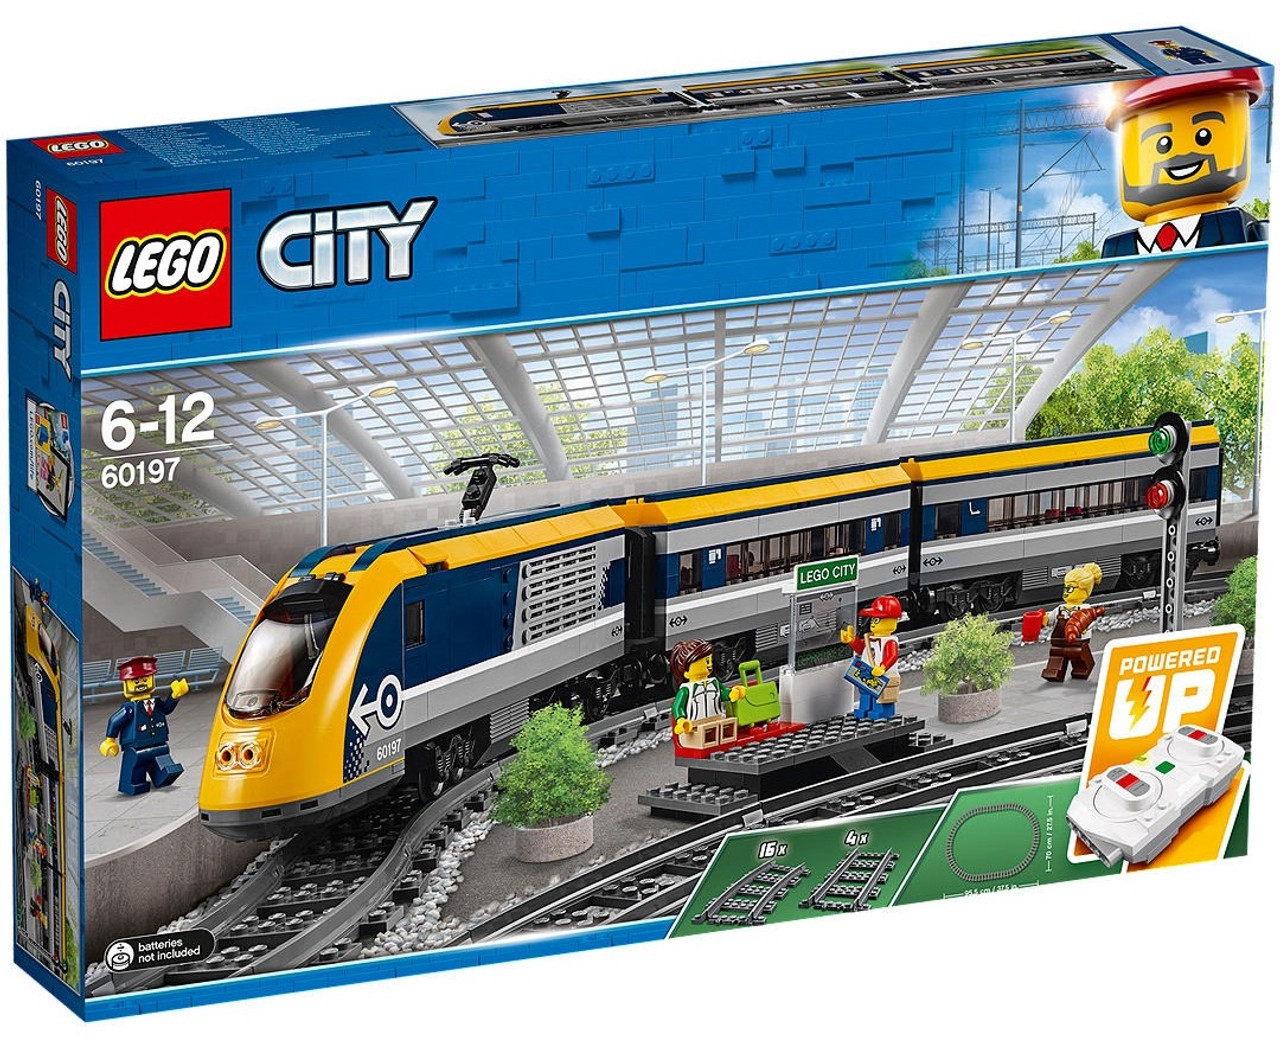 LEGO 60197 City Passenger Train Toy and 